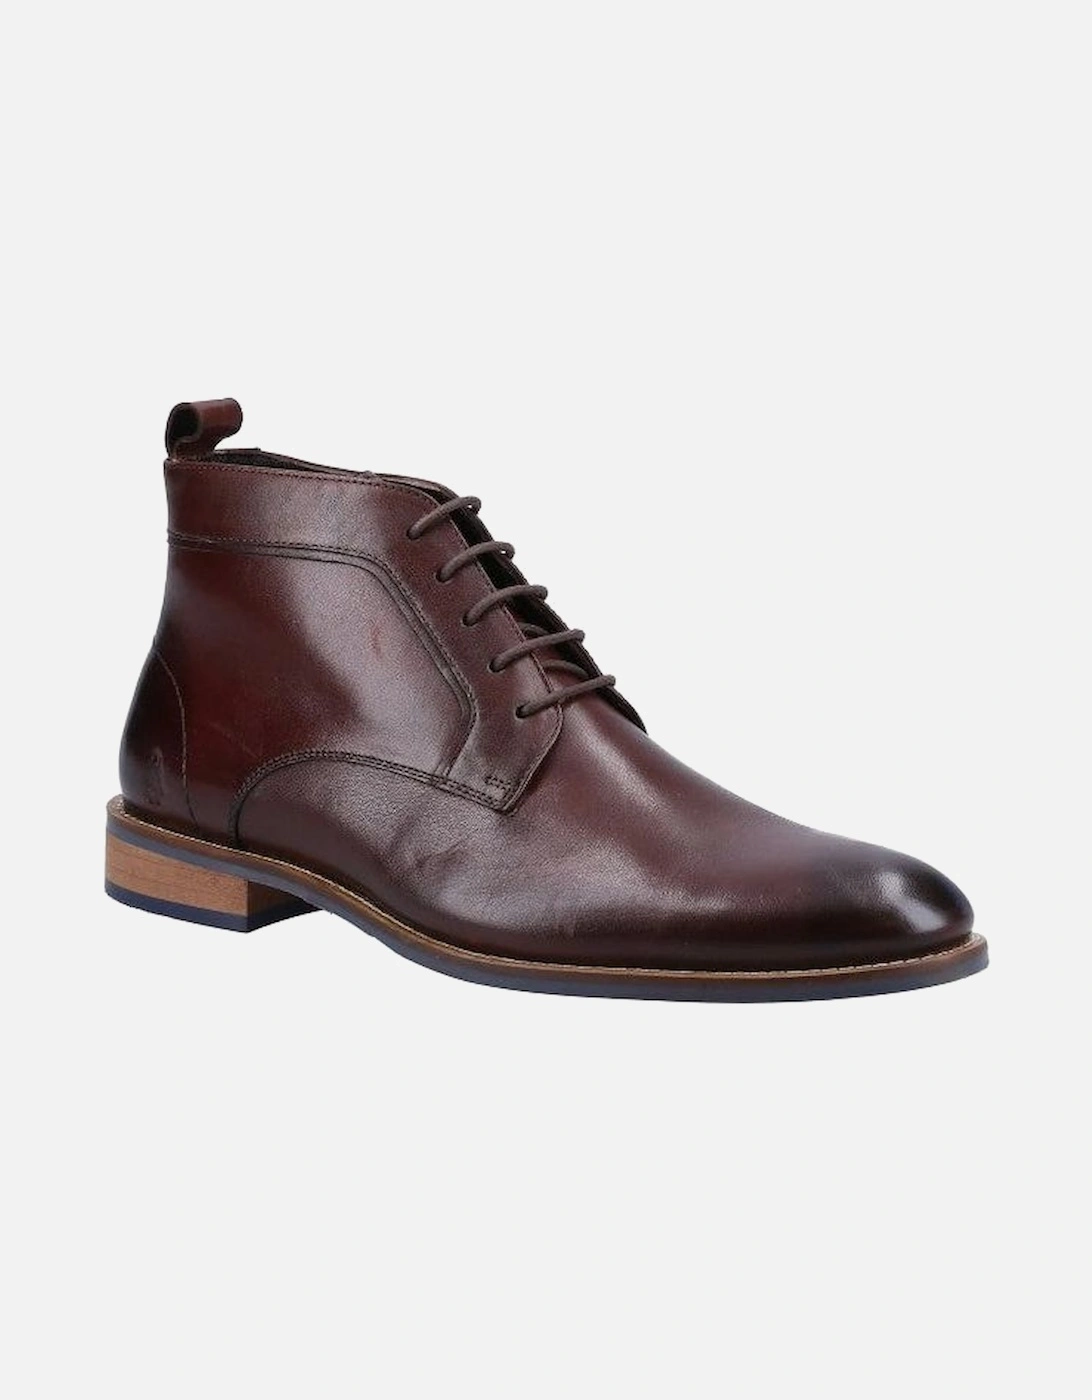 Declan Lace up boot in Brown leather, 2 of 1